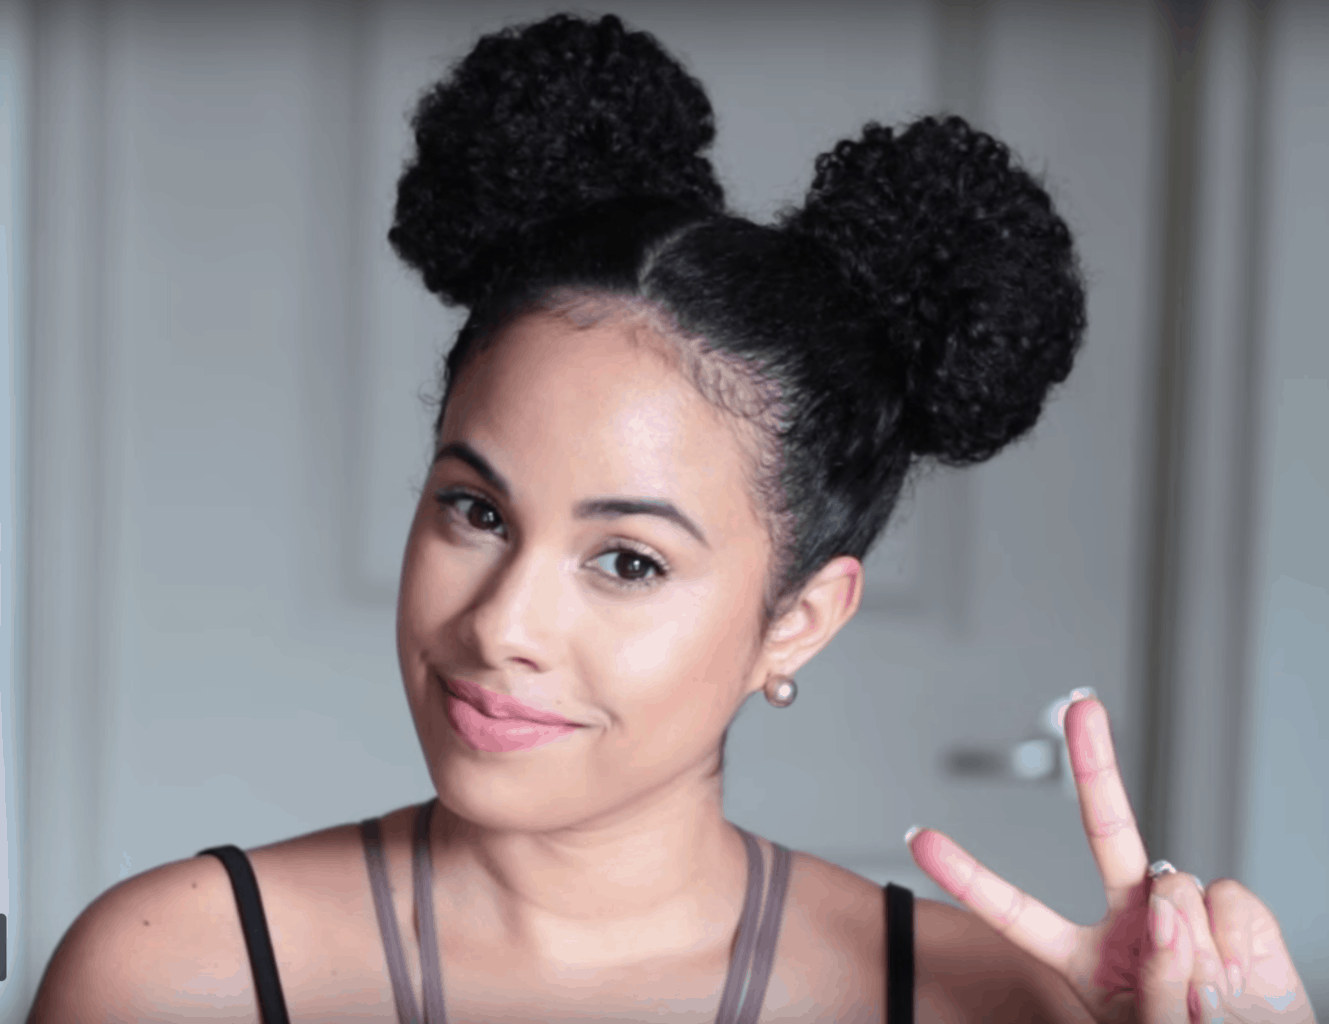 How To Do Space Buns Hairstyle - Tips, Tricks, & Tutorials %